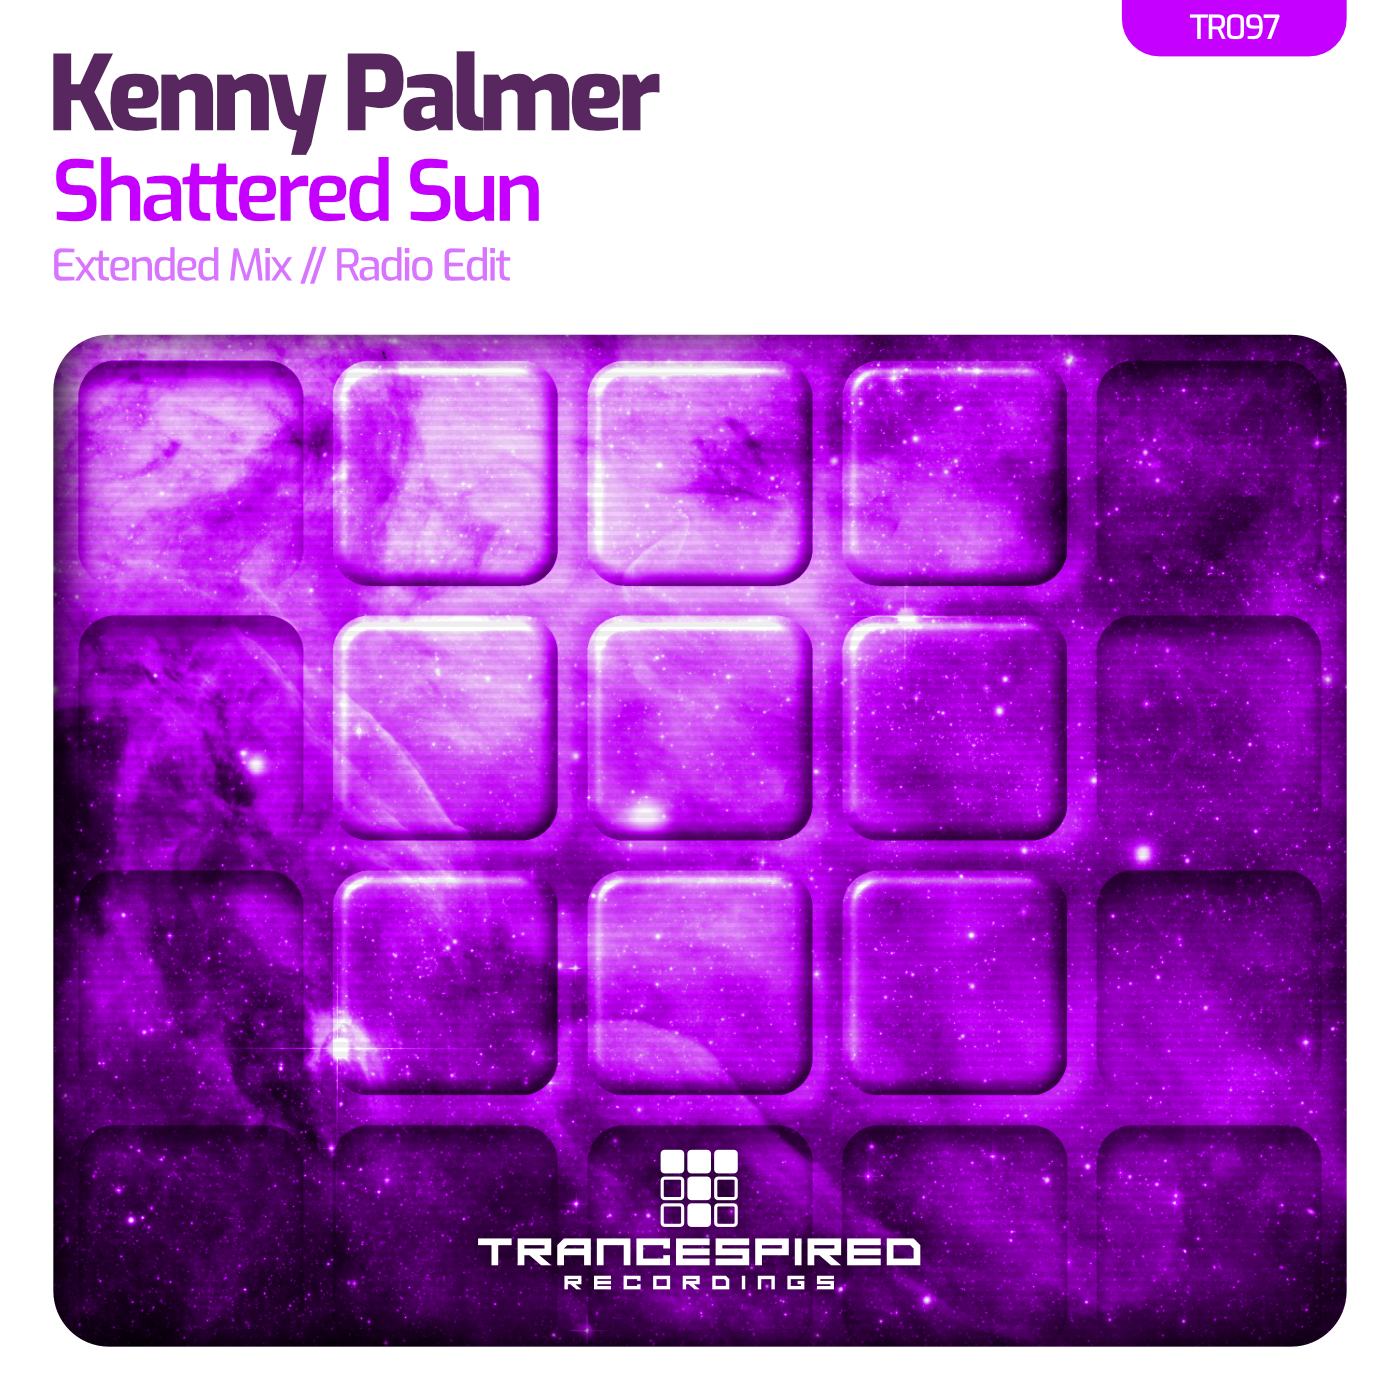 Kenny Palmer presents Shattered Sun on Trancespired Recordings